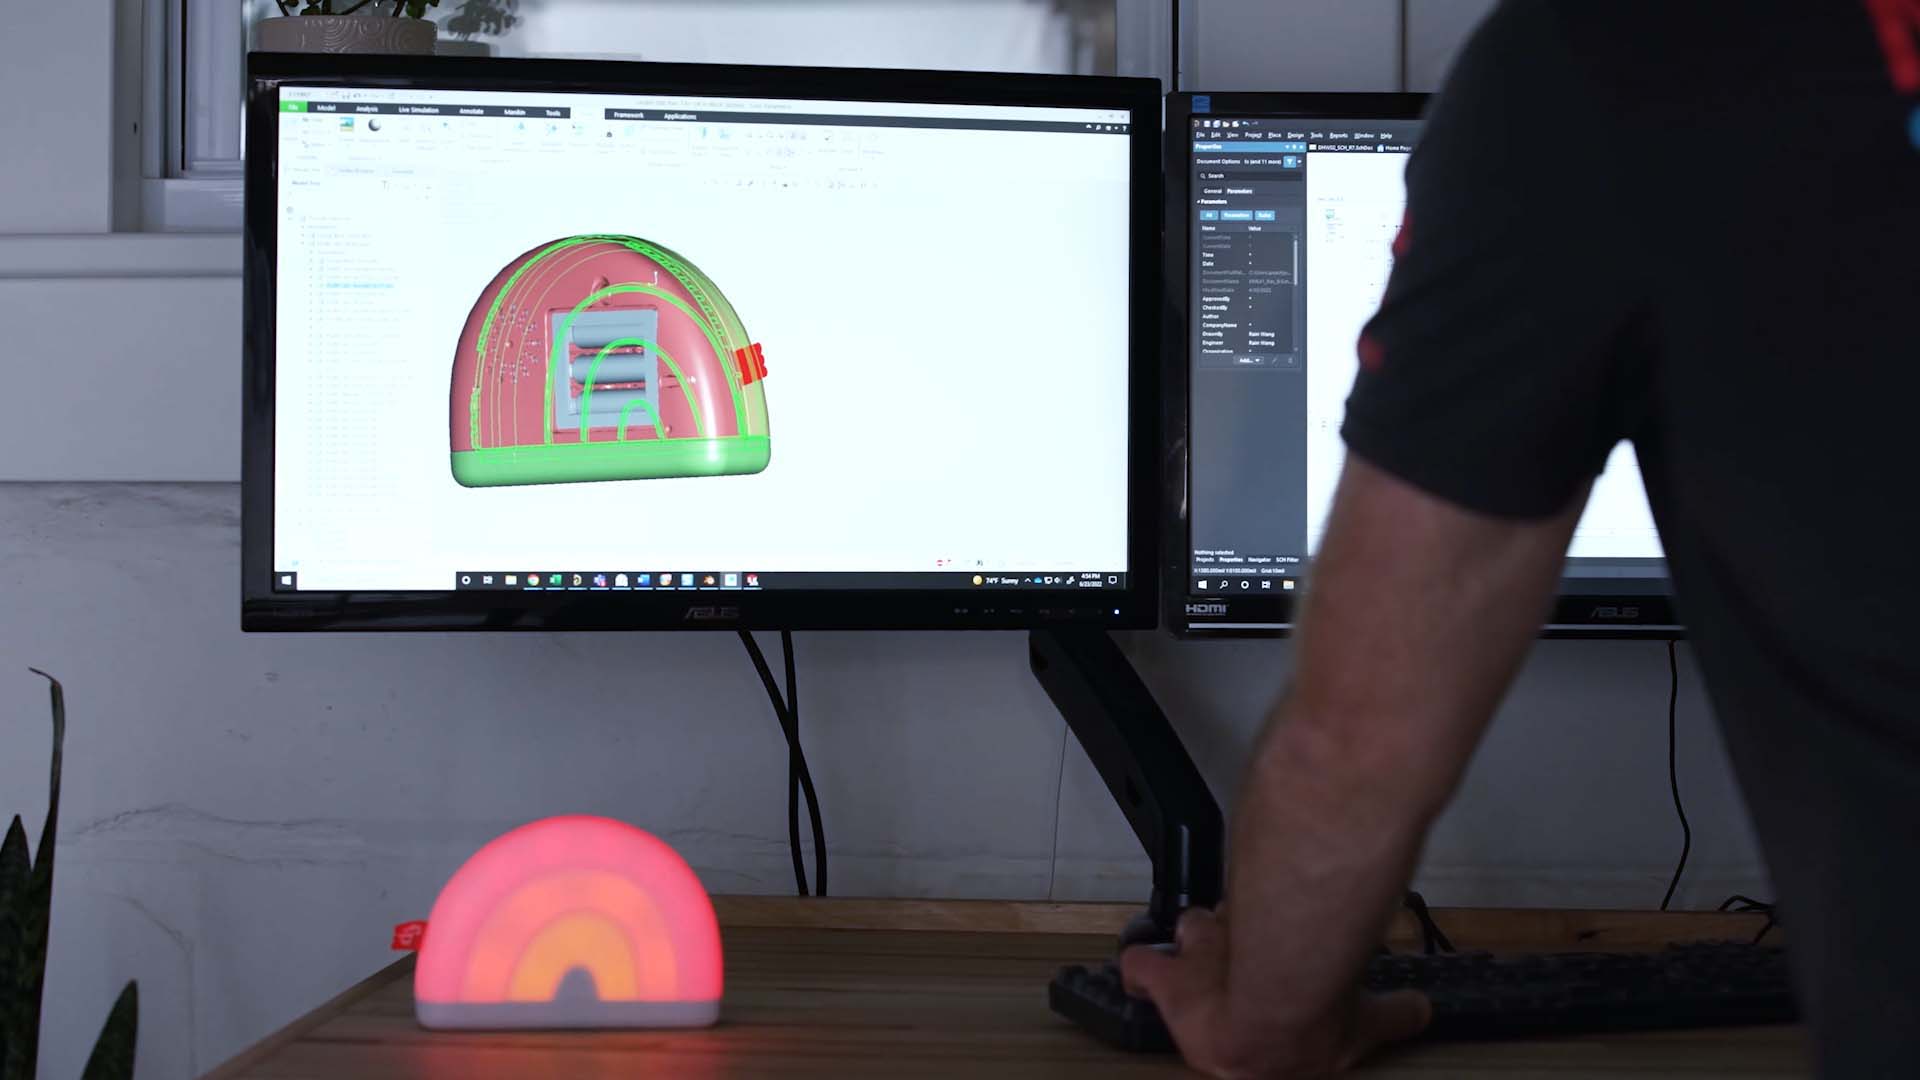 Innovation team at Mattel uses Creo and Solidworks, Z-brush, Maya and Blender